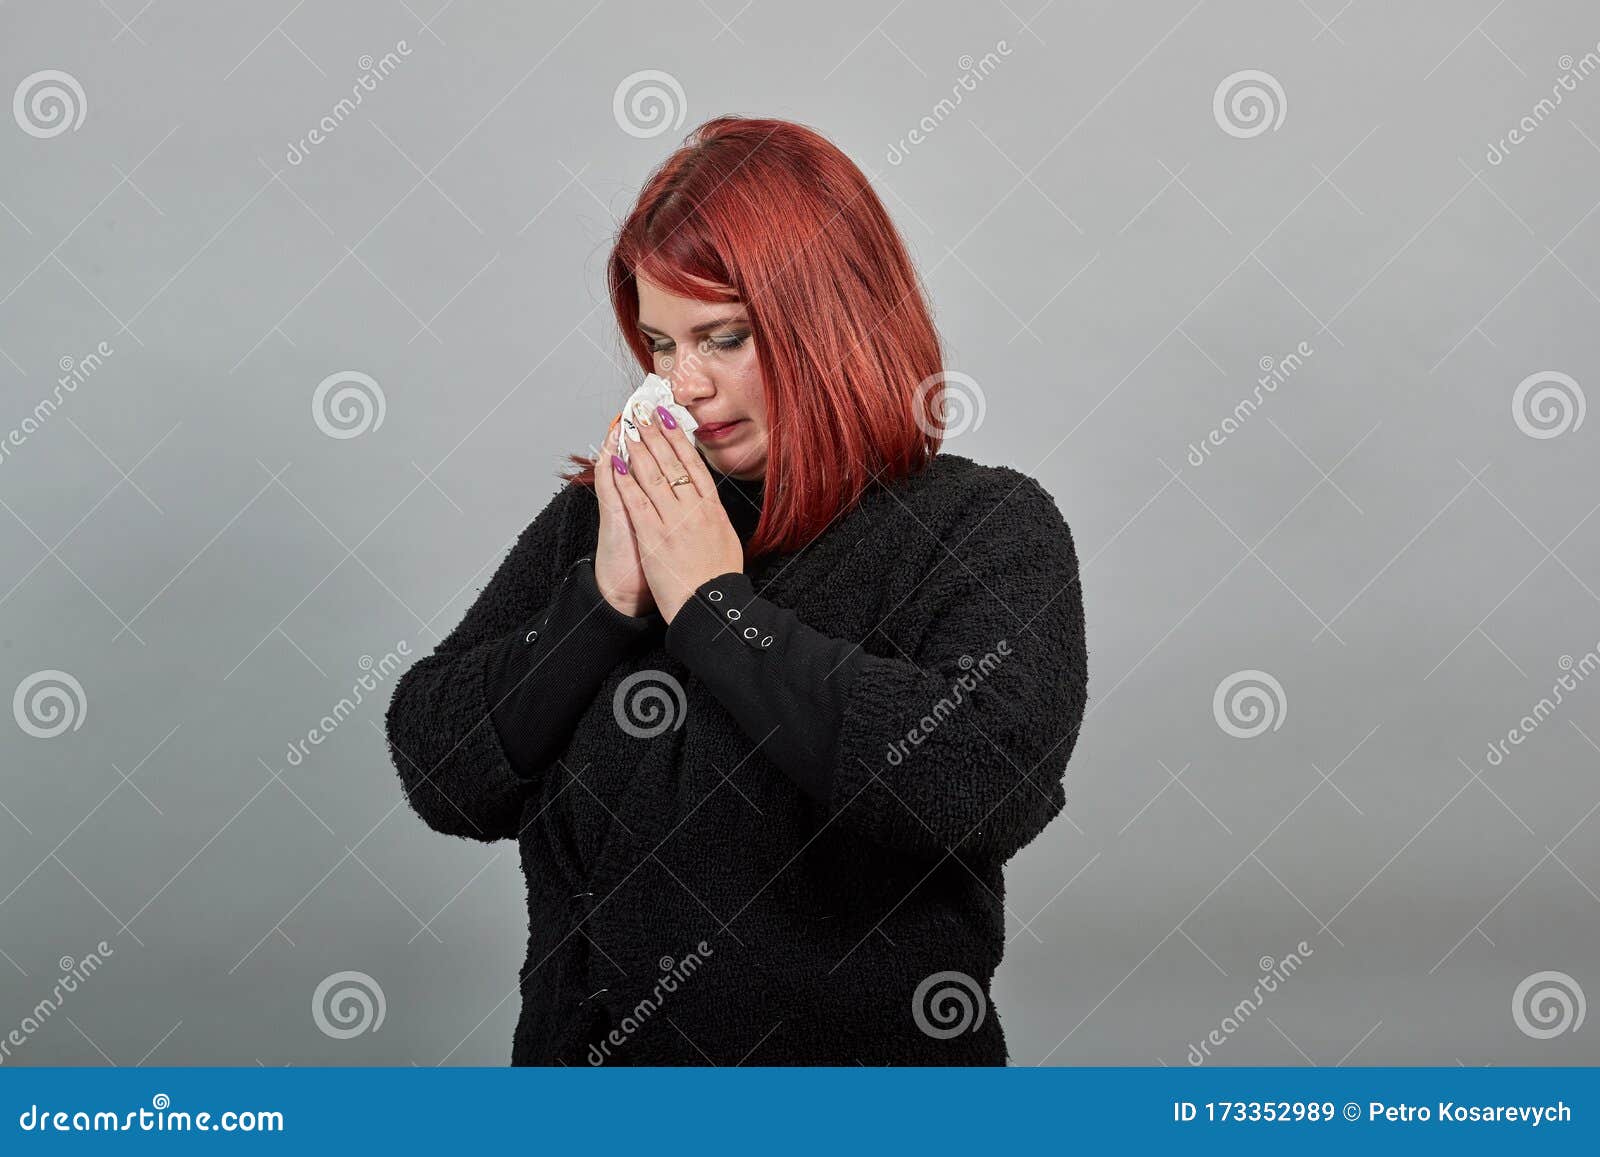 lady in black sweater sick woman with snot in a handkerchief, cold, runny nose